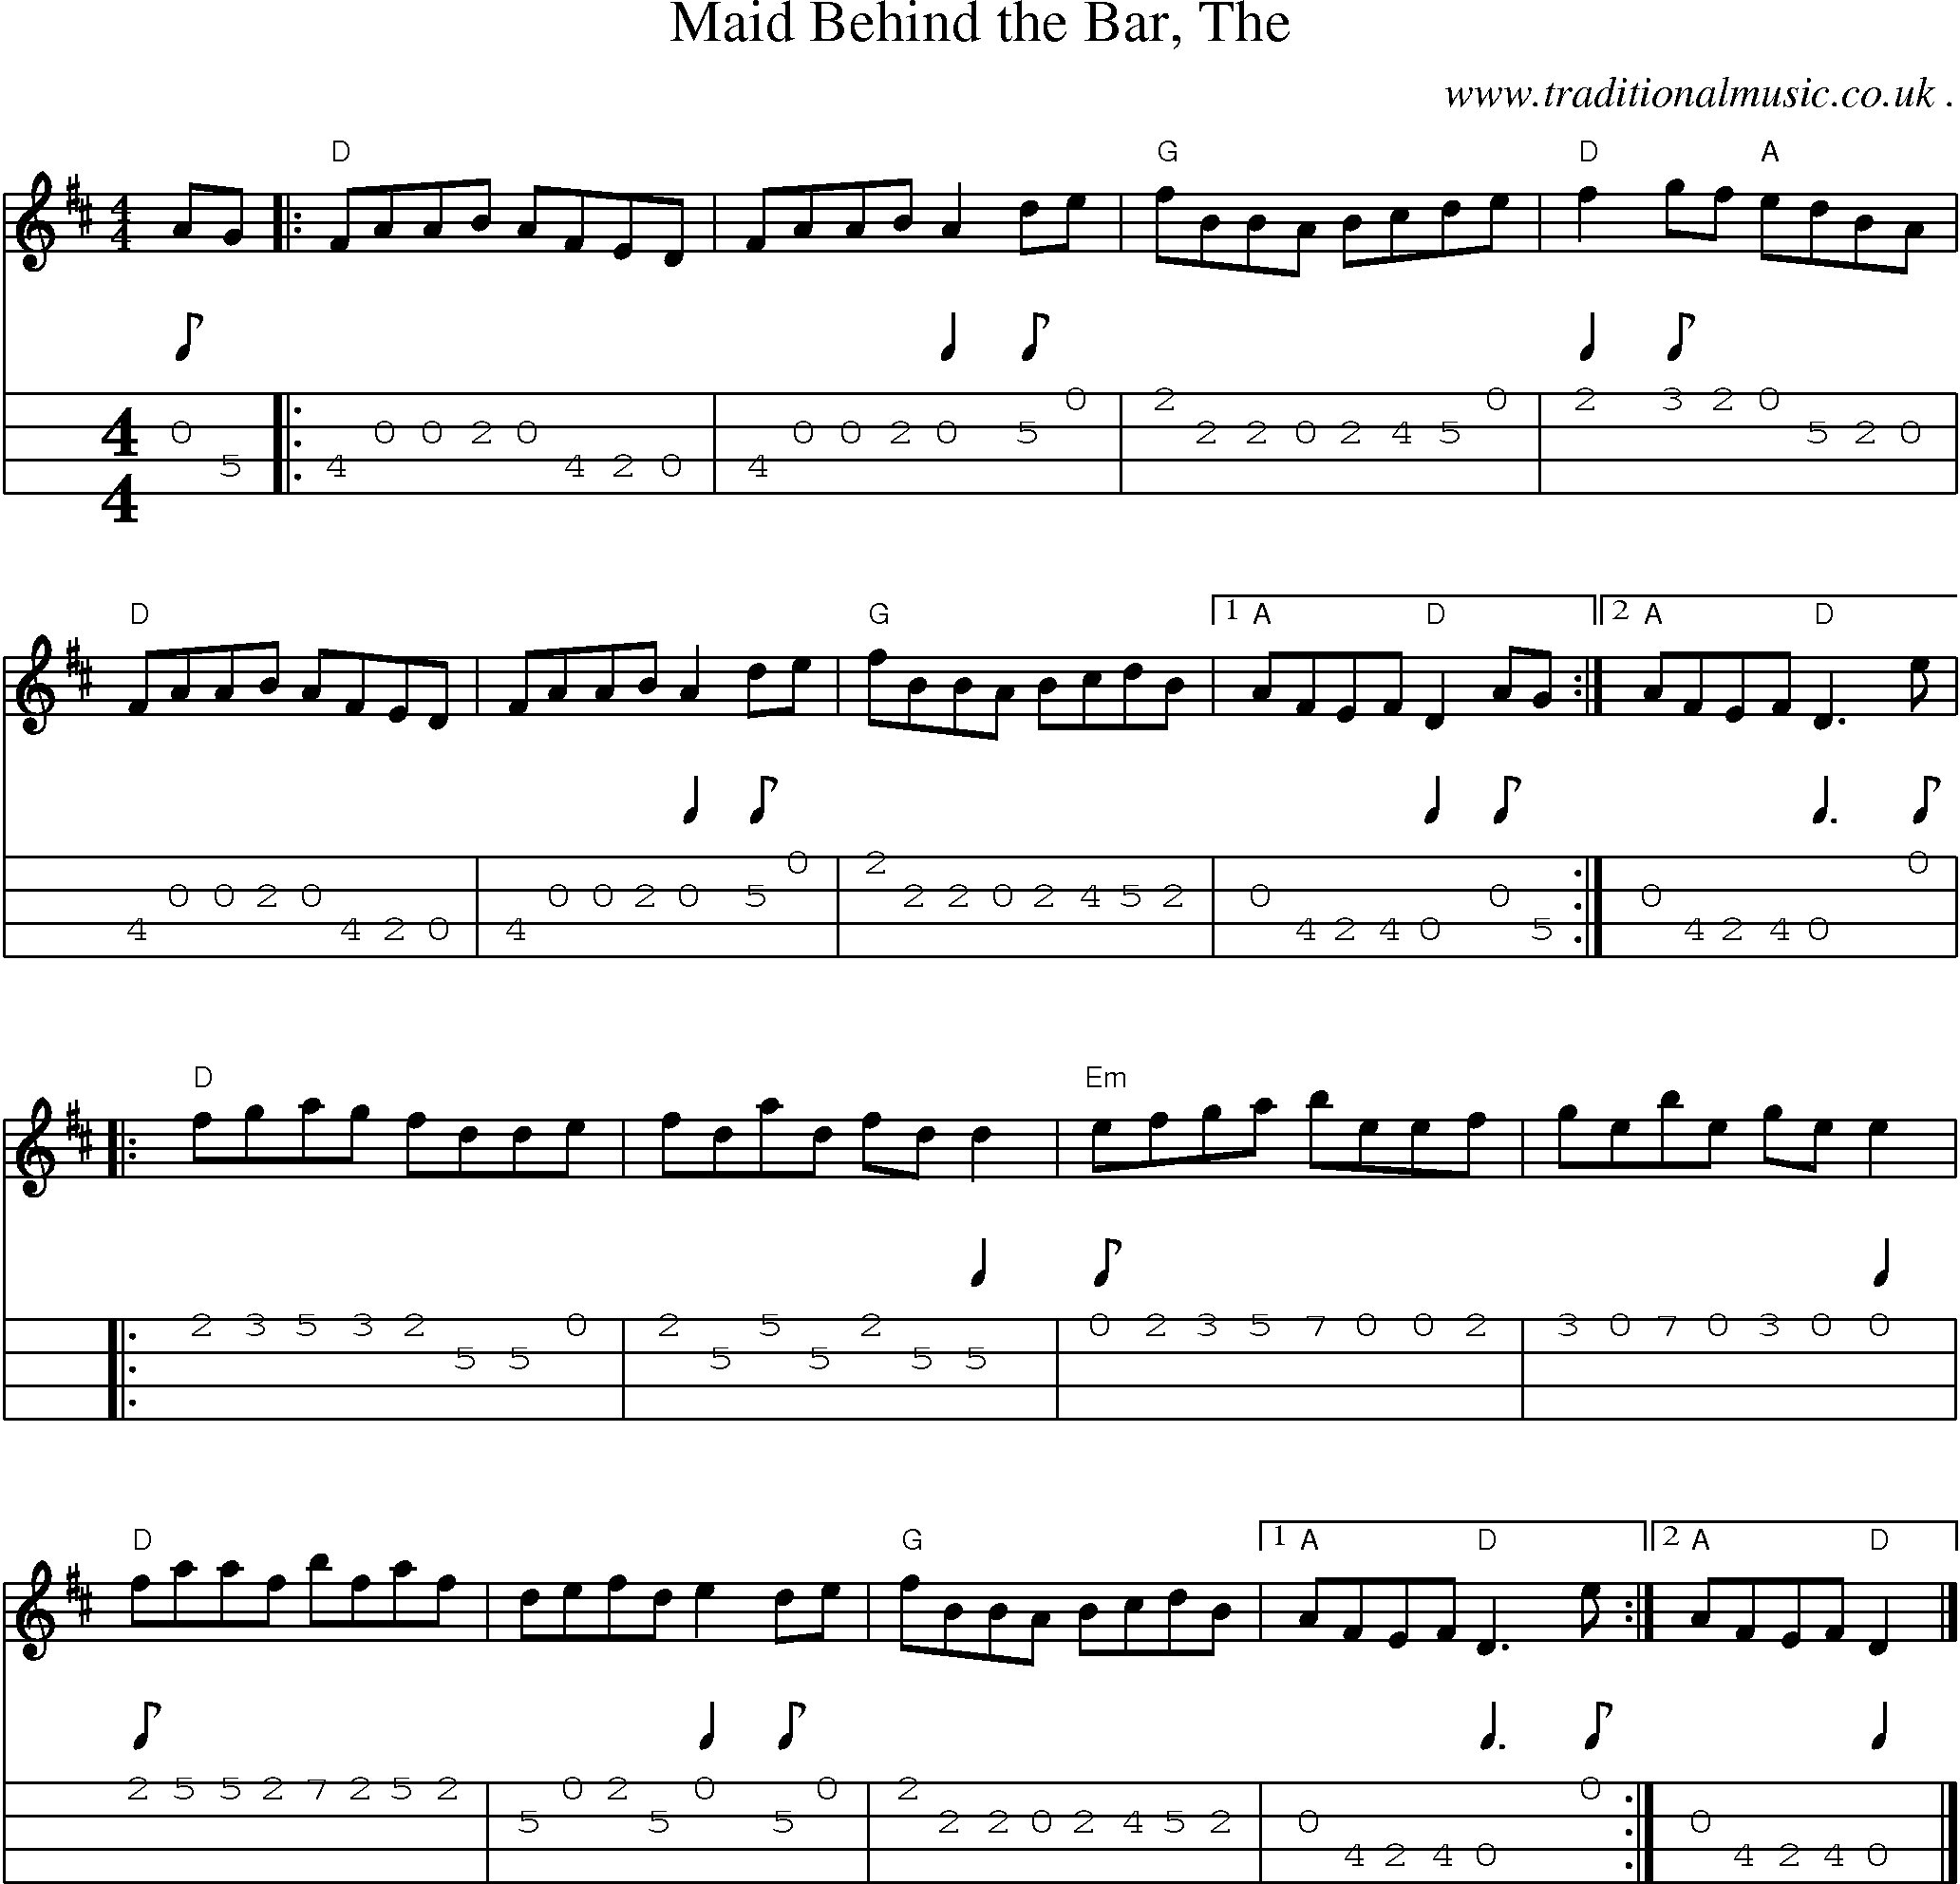 Music Score and Guitar Tabs for Maid Behind the Bar The